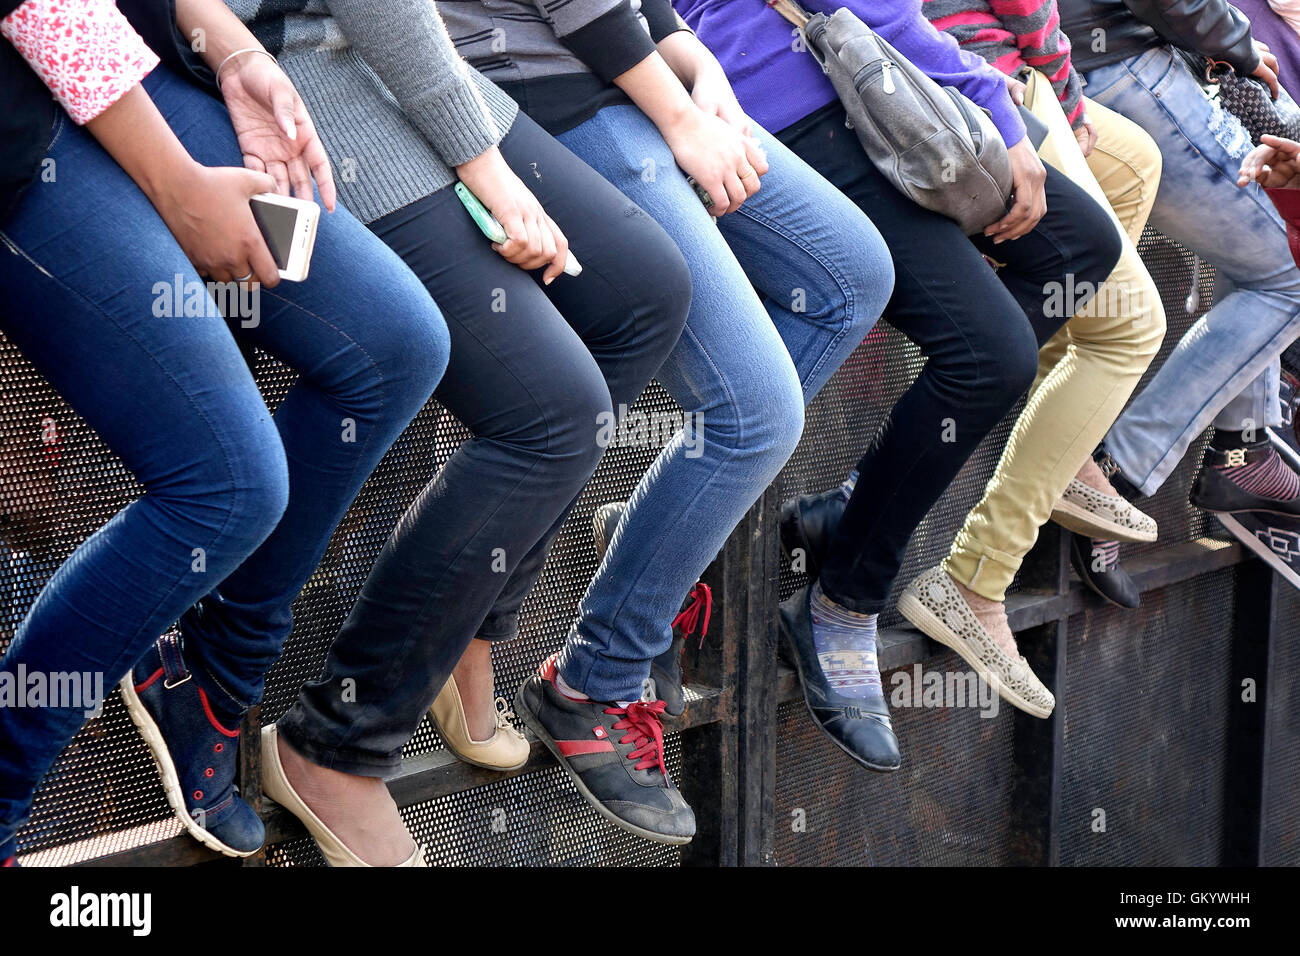 All legs.....students sitting on a ledge and watching an open air show Stock Photo